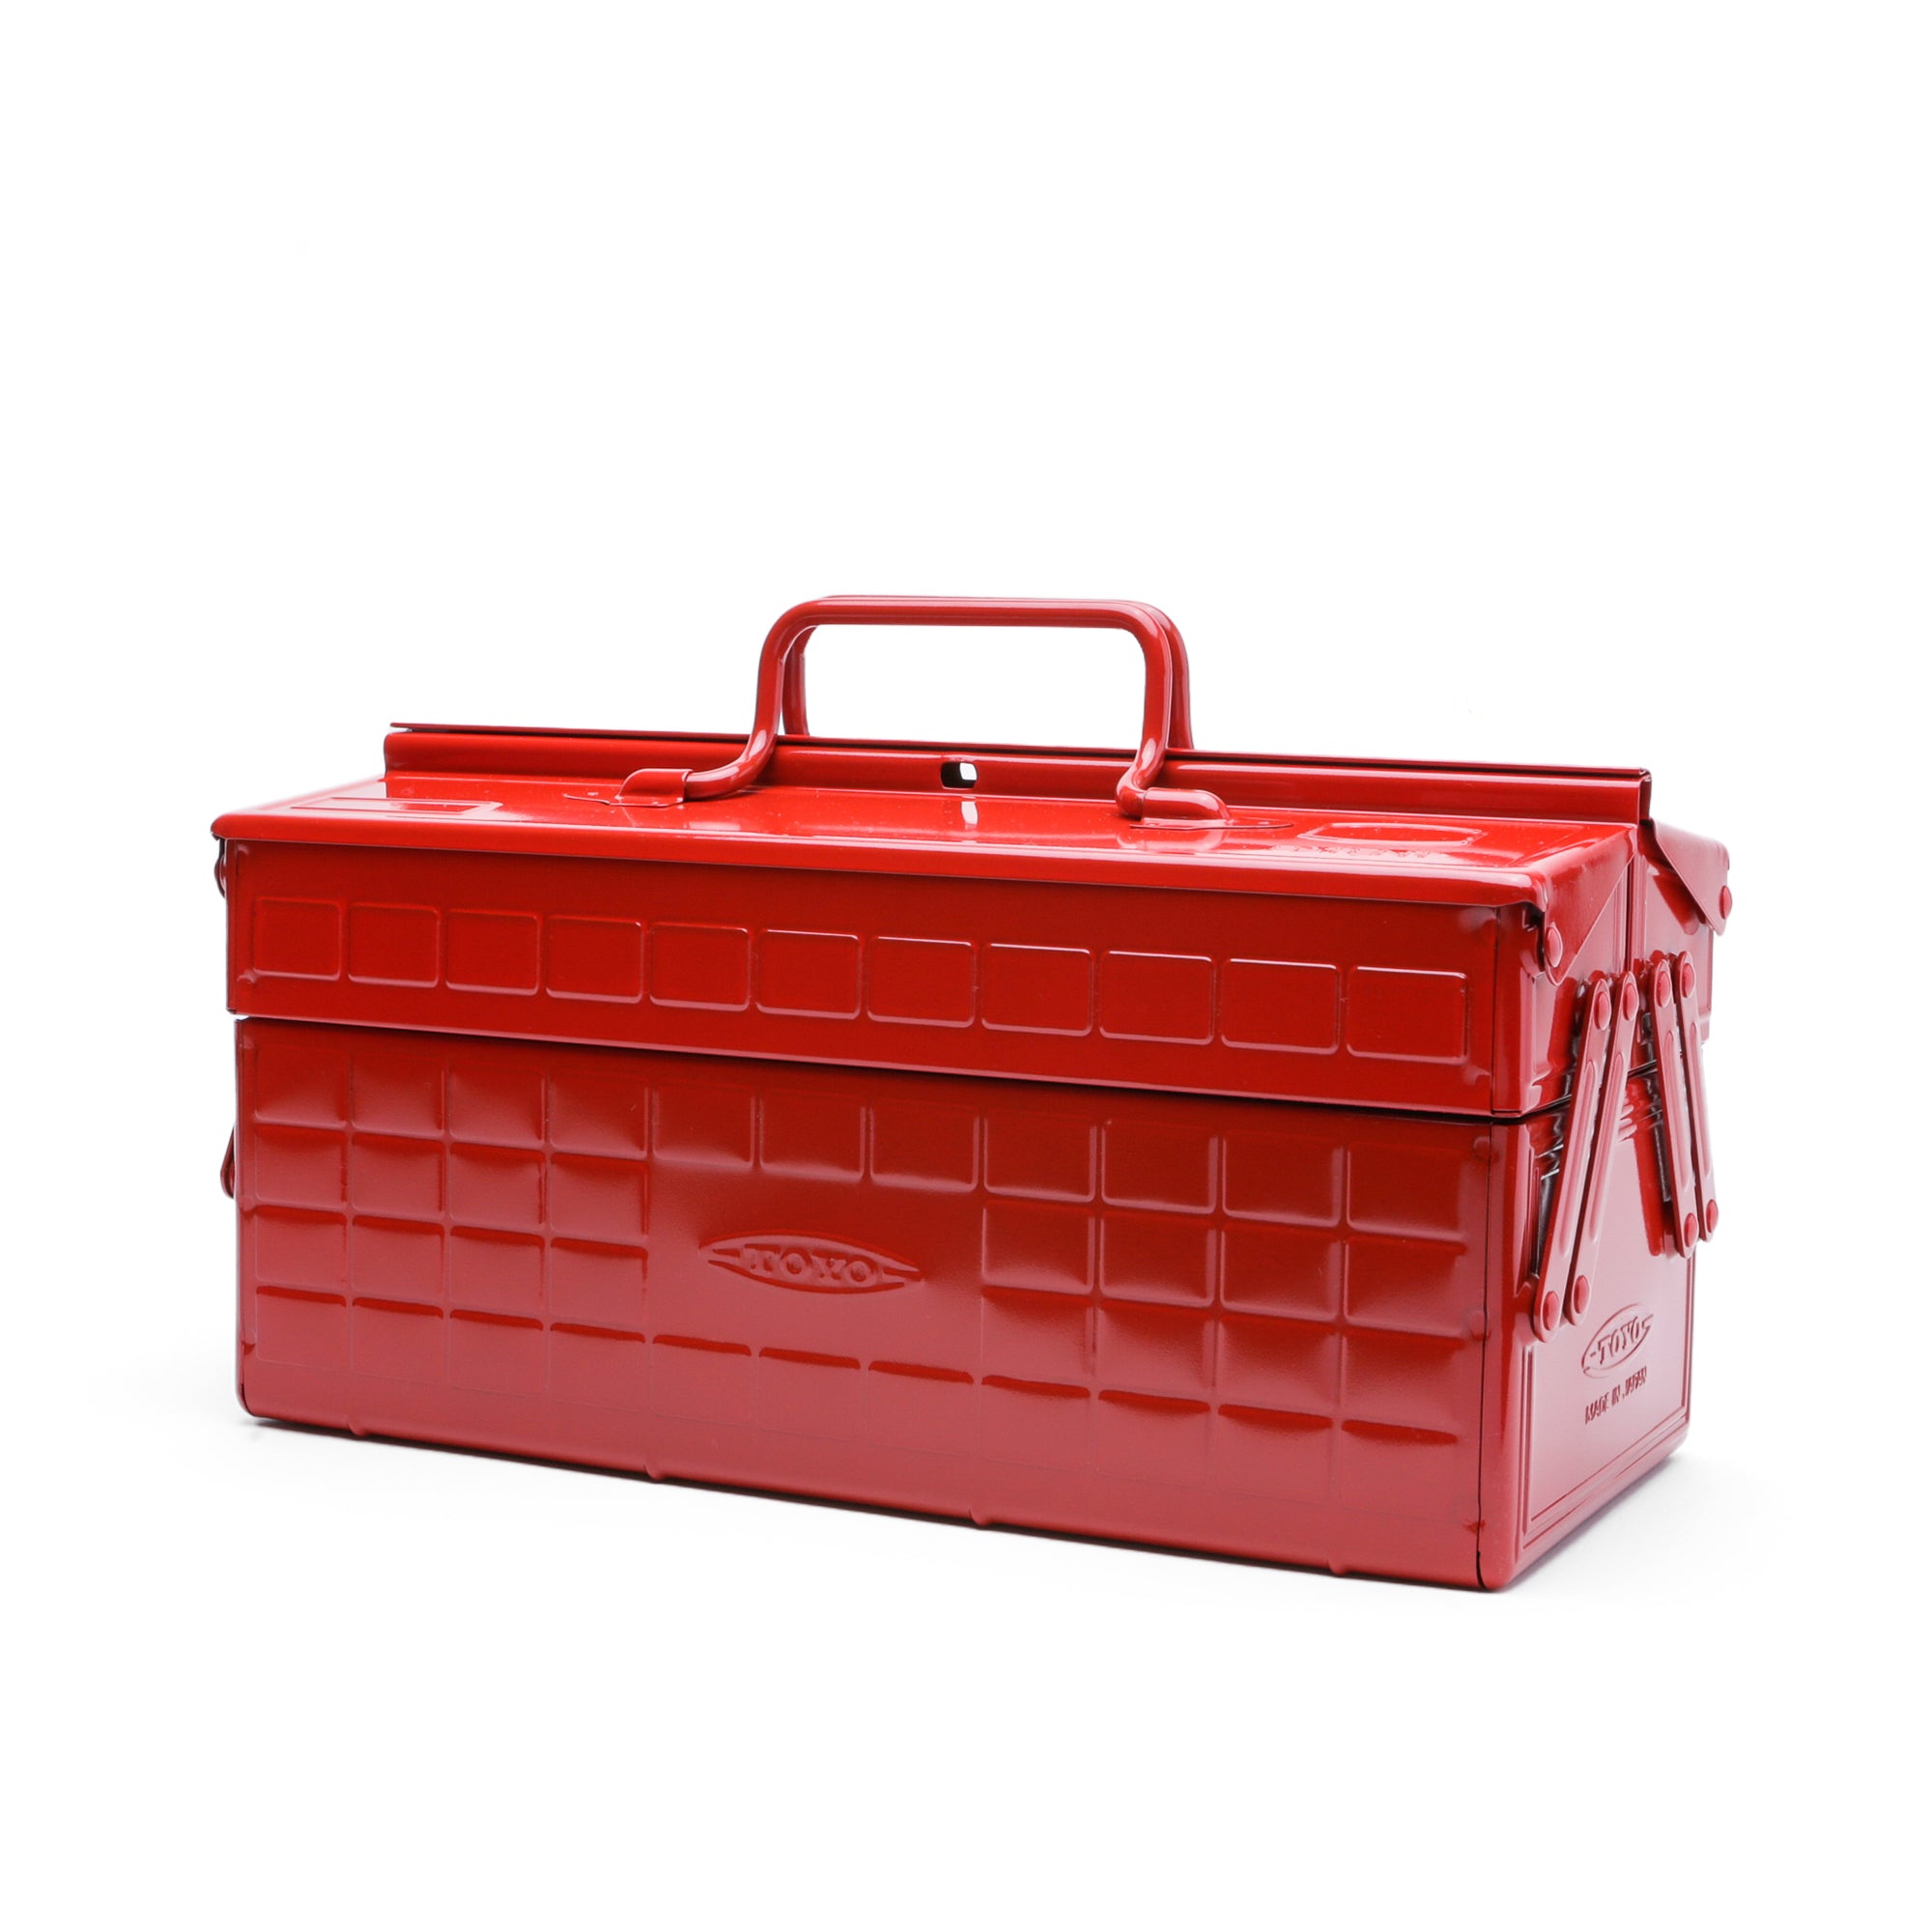 Red Toyo Steel Toolbox | Cantilever Lid | Upper Storage Trays, Style ST-350